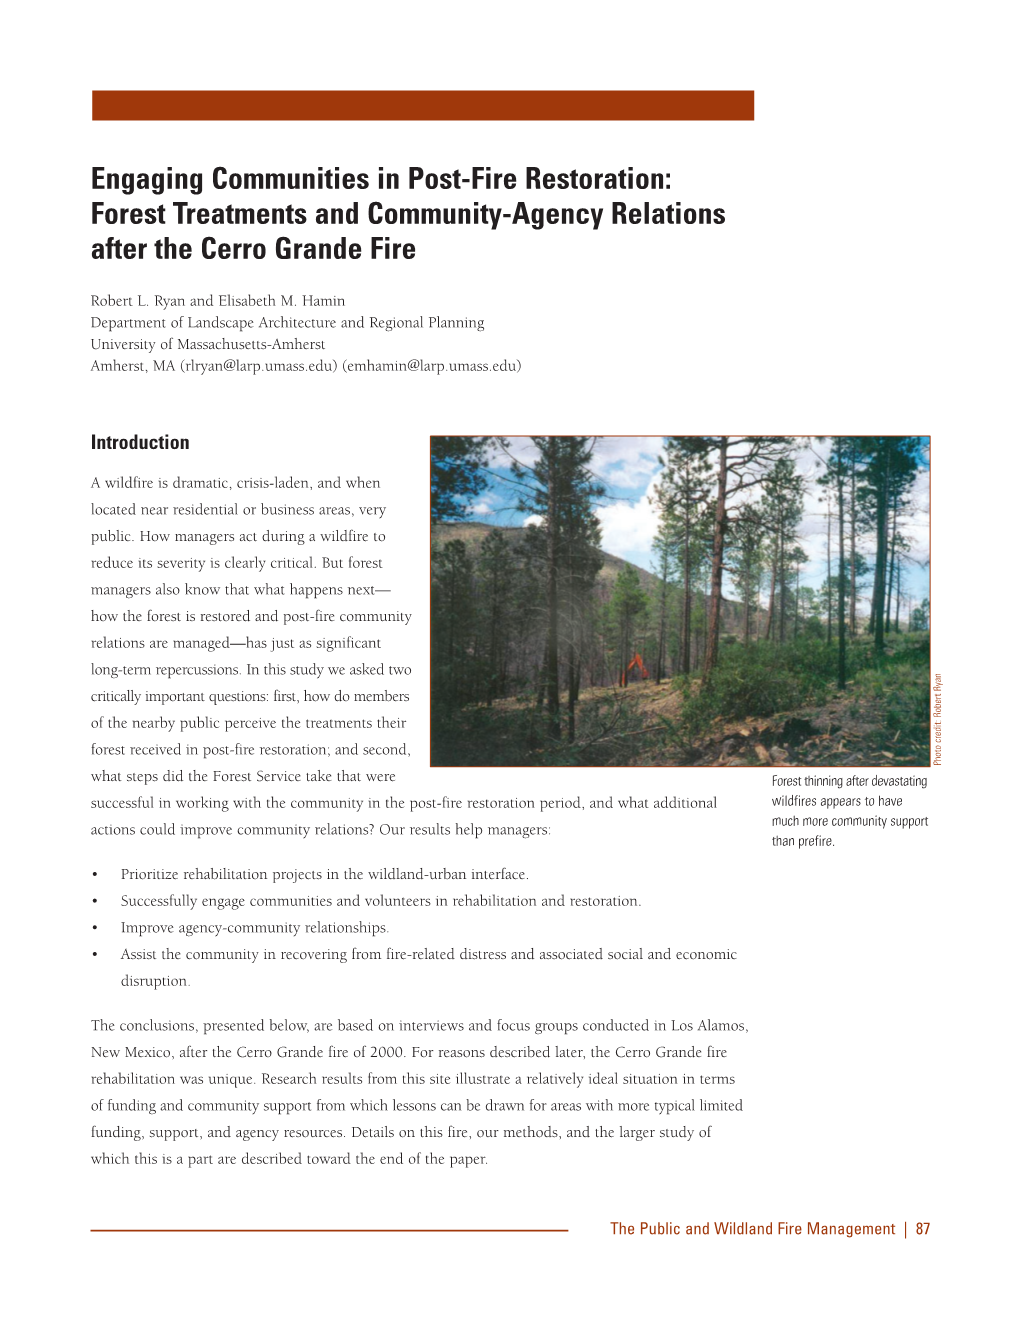 Engaging Communities in Post-Fire Restoration: Forest Treatments and Community-Agency Relations After the Cerro Grande Fire